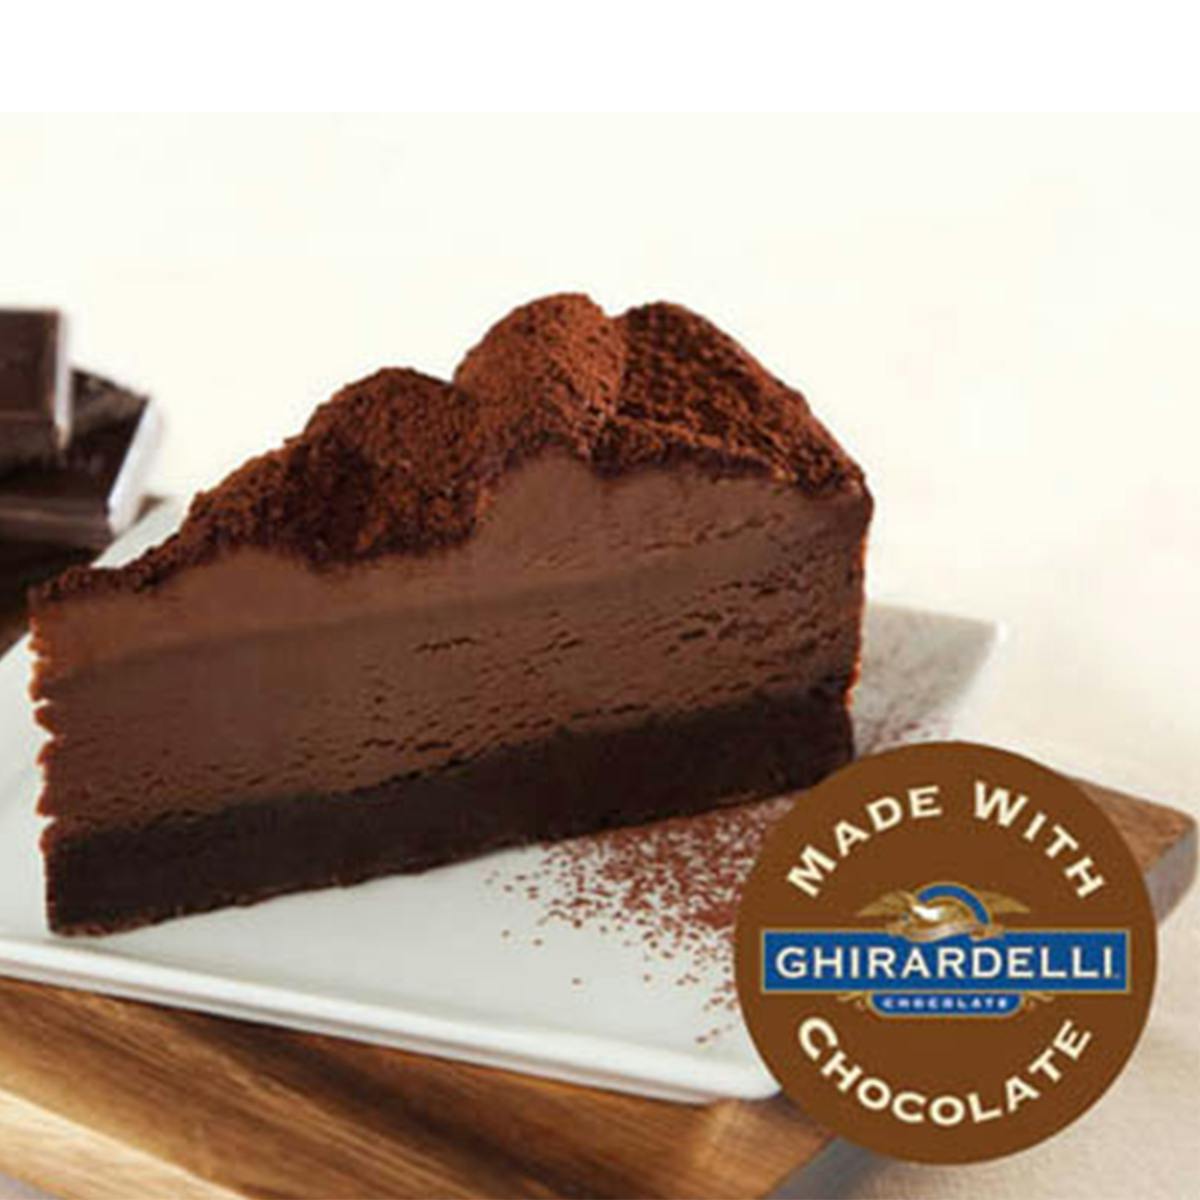 Double Chocolate Cheesecake With Ghirardelli Chocolate By Eli S Cheesecake Company Goldbelly